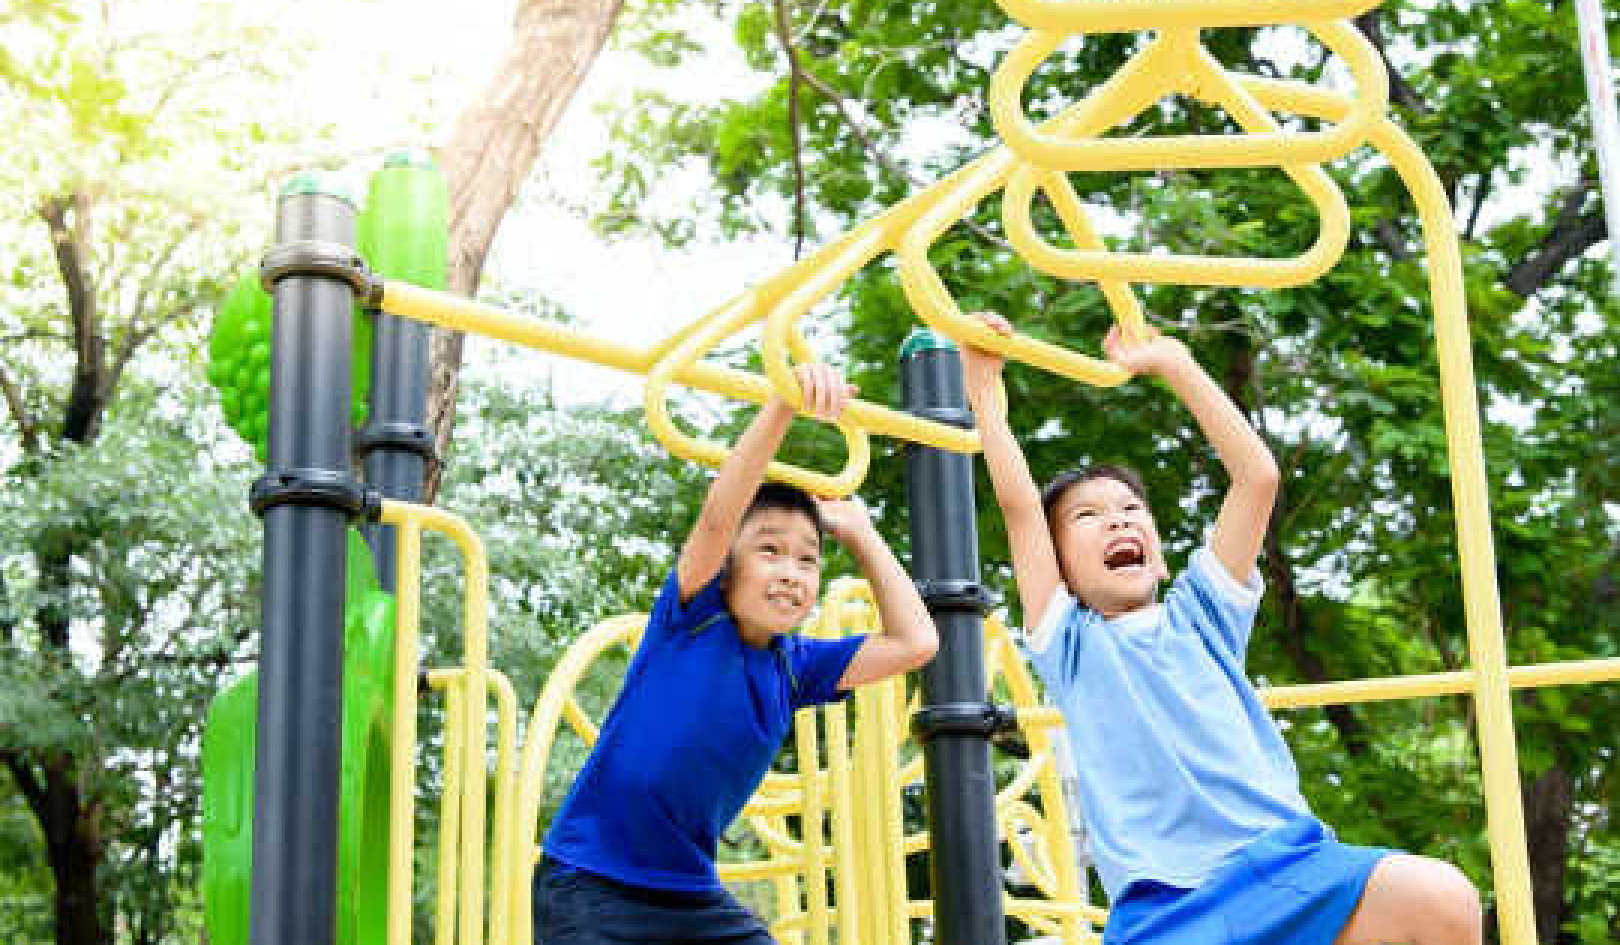 Heading Back To The Playground? 10 Tips To Keep Your Family And Others Covid-safe